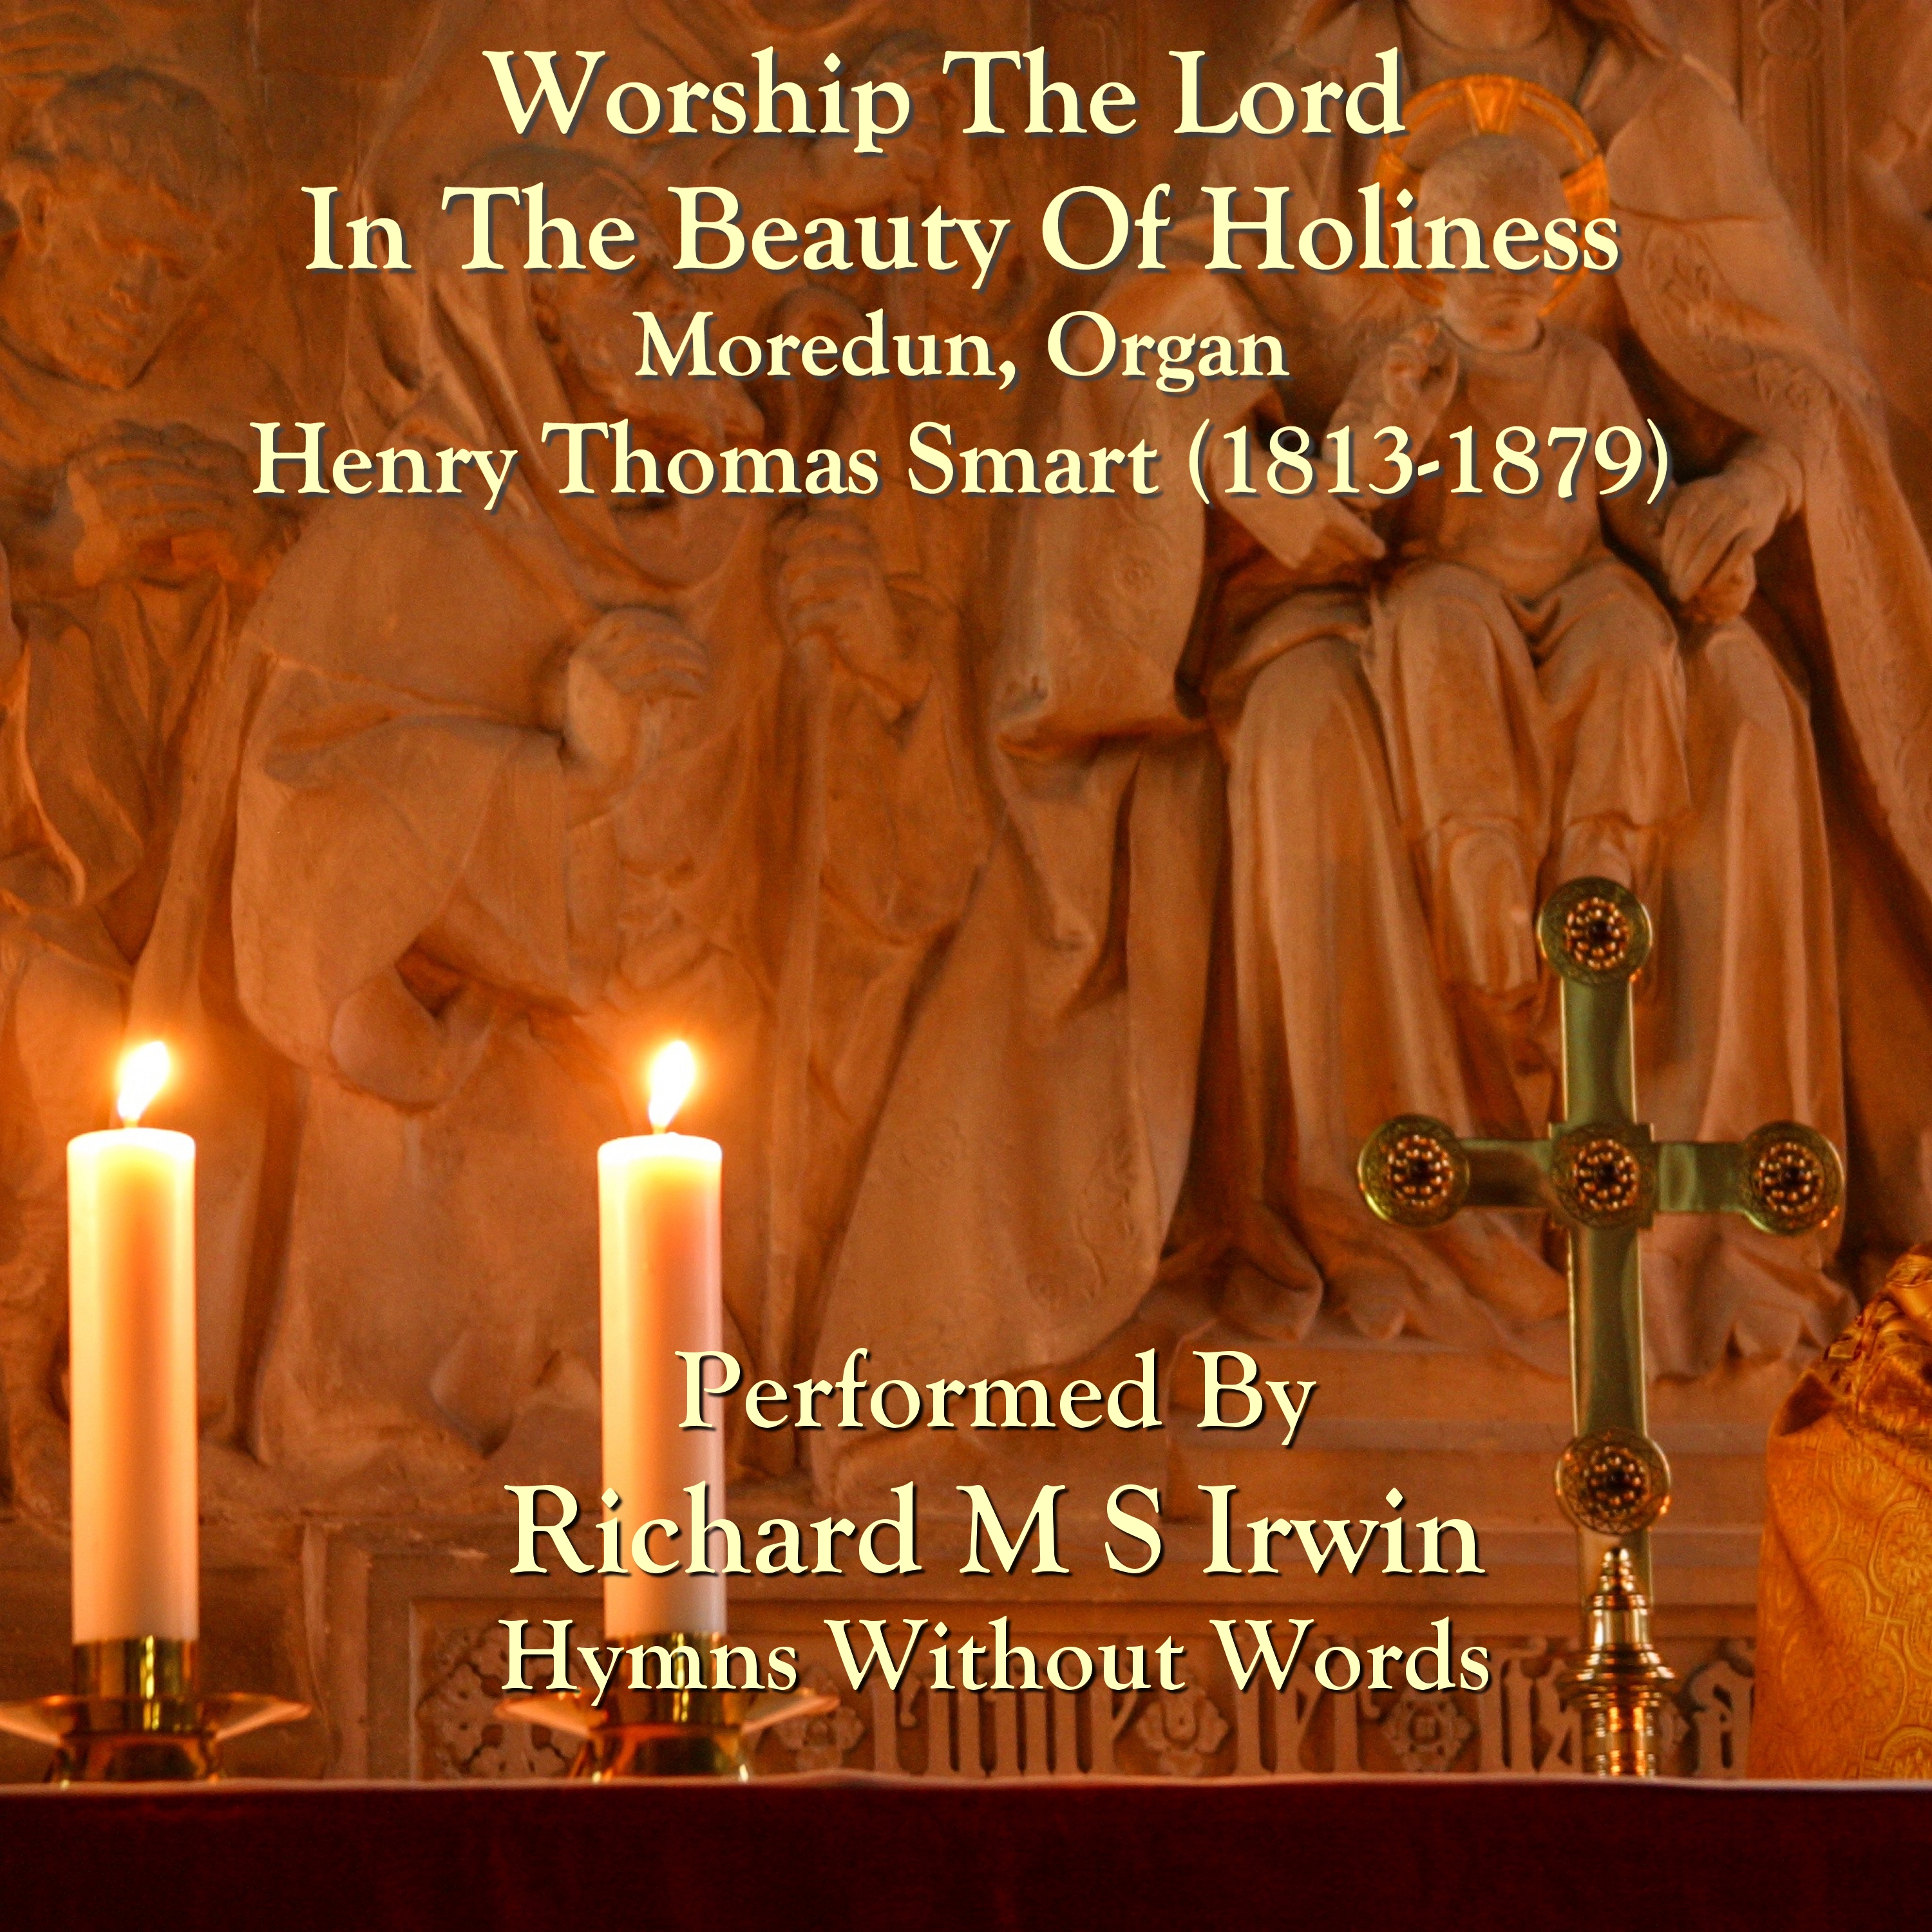 Worship The Lord In The Beauty Of Holiness (Moredun)